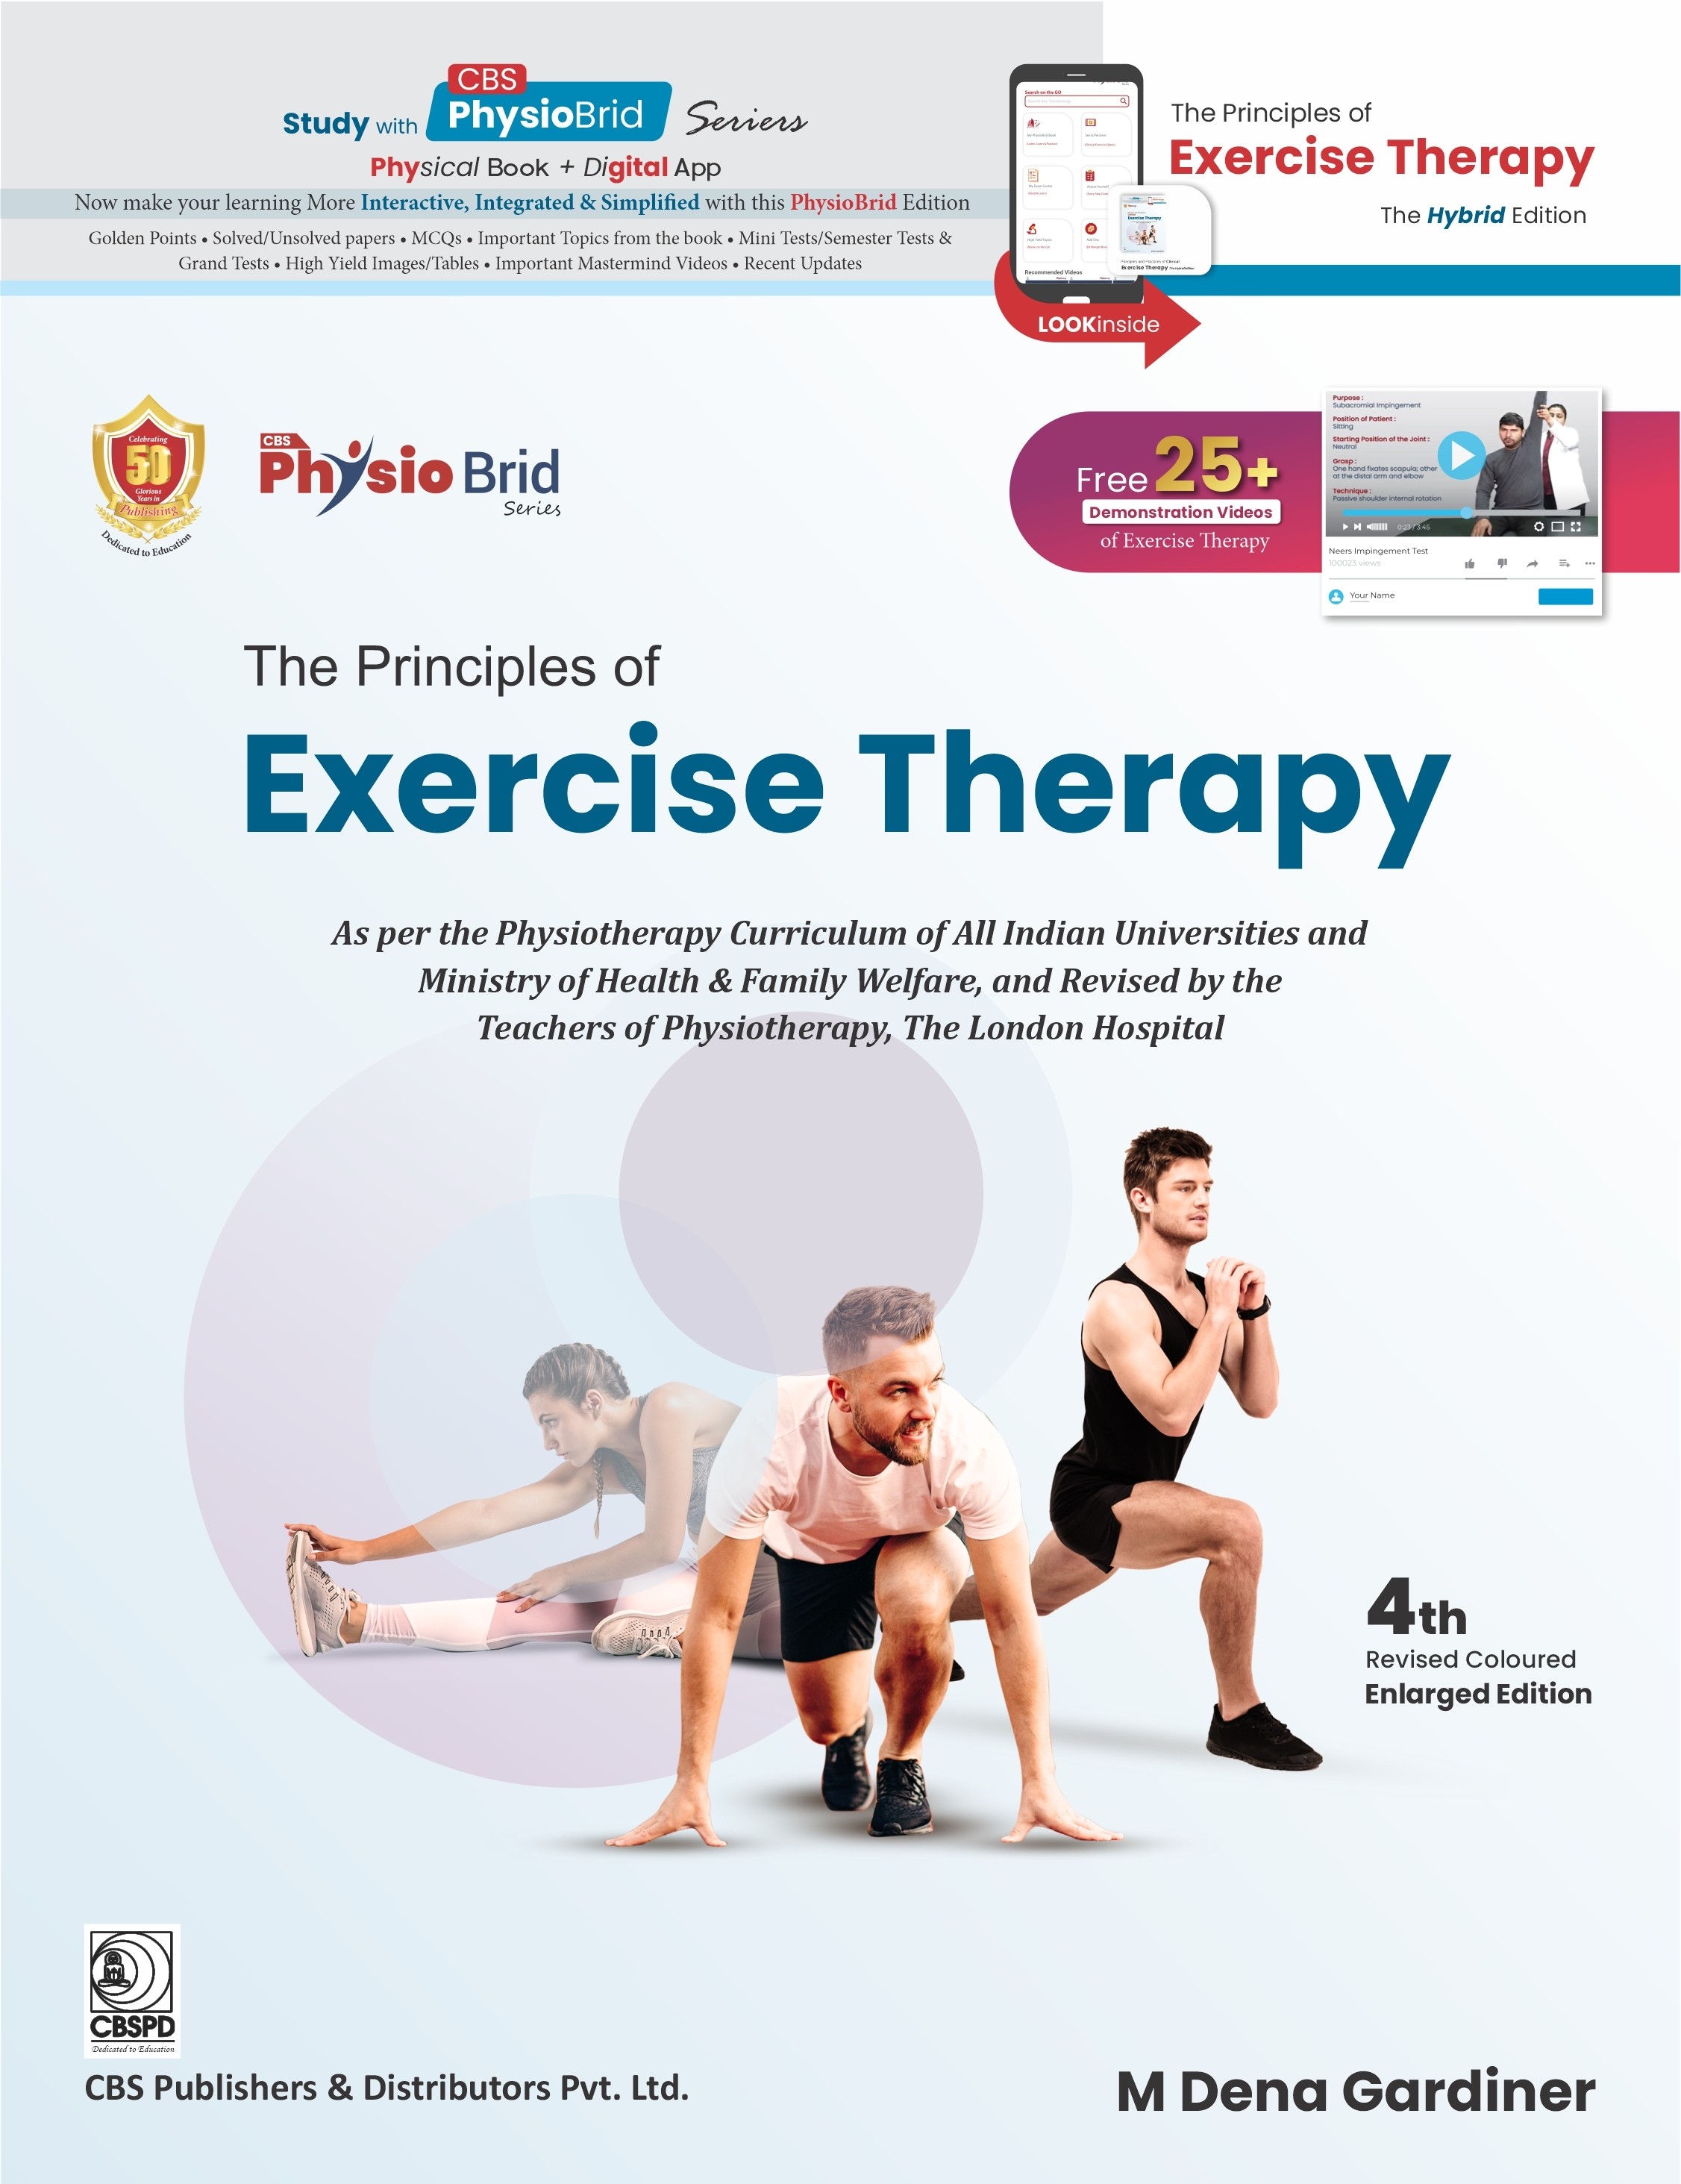 The Principles of Exercise Therapy 4th Revised Enlarged Colored edition